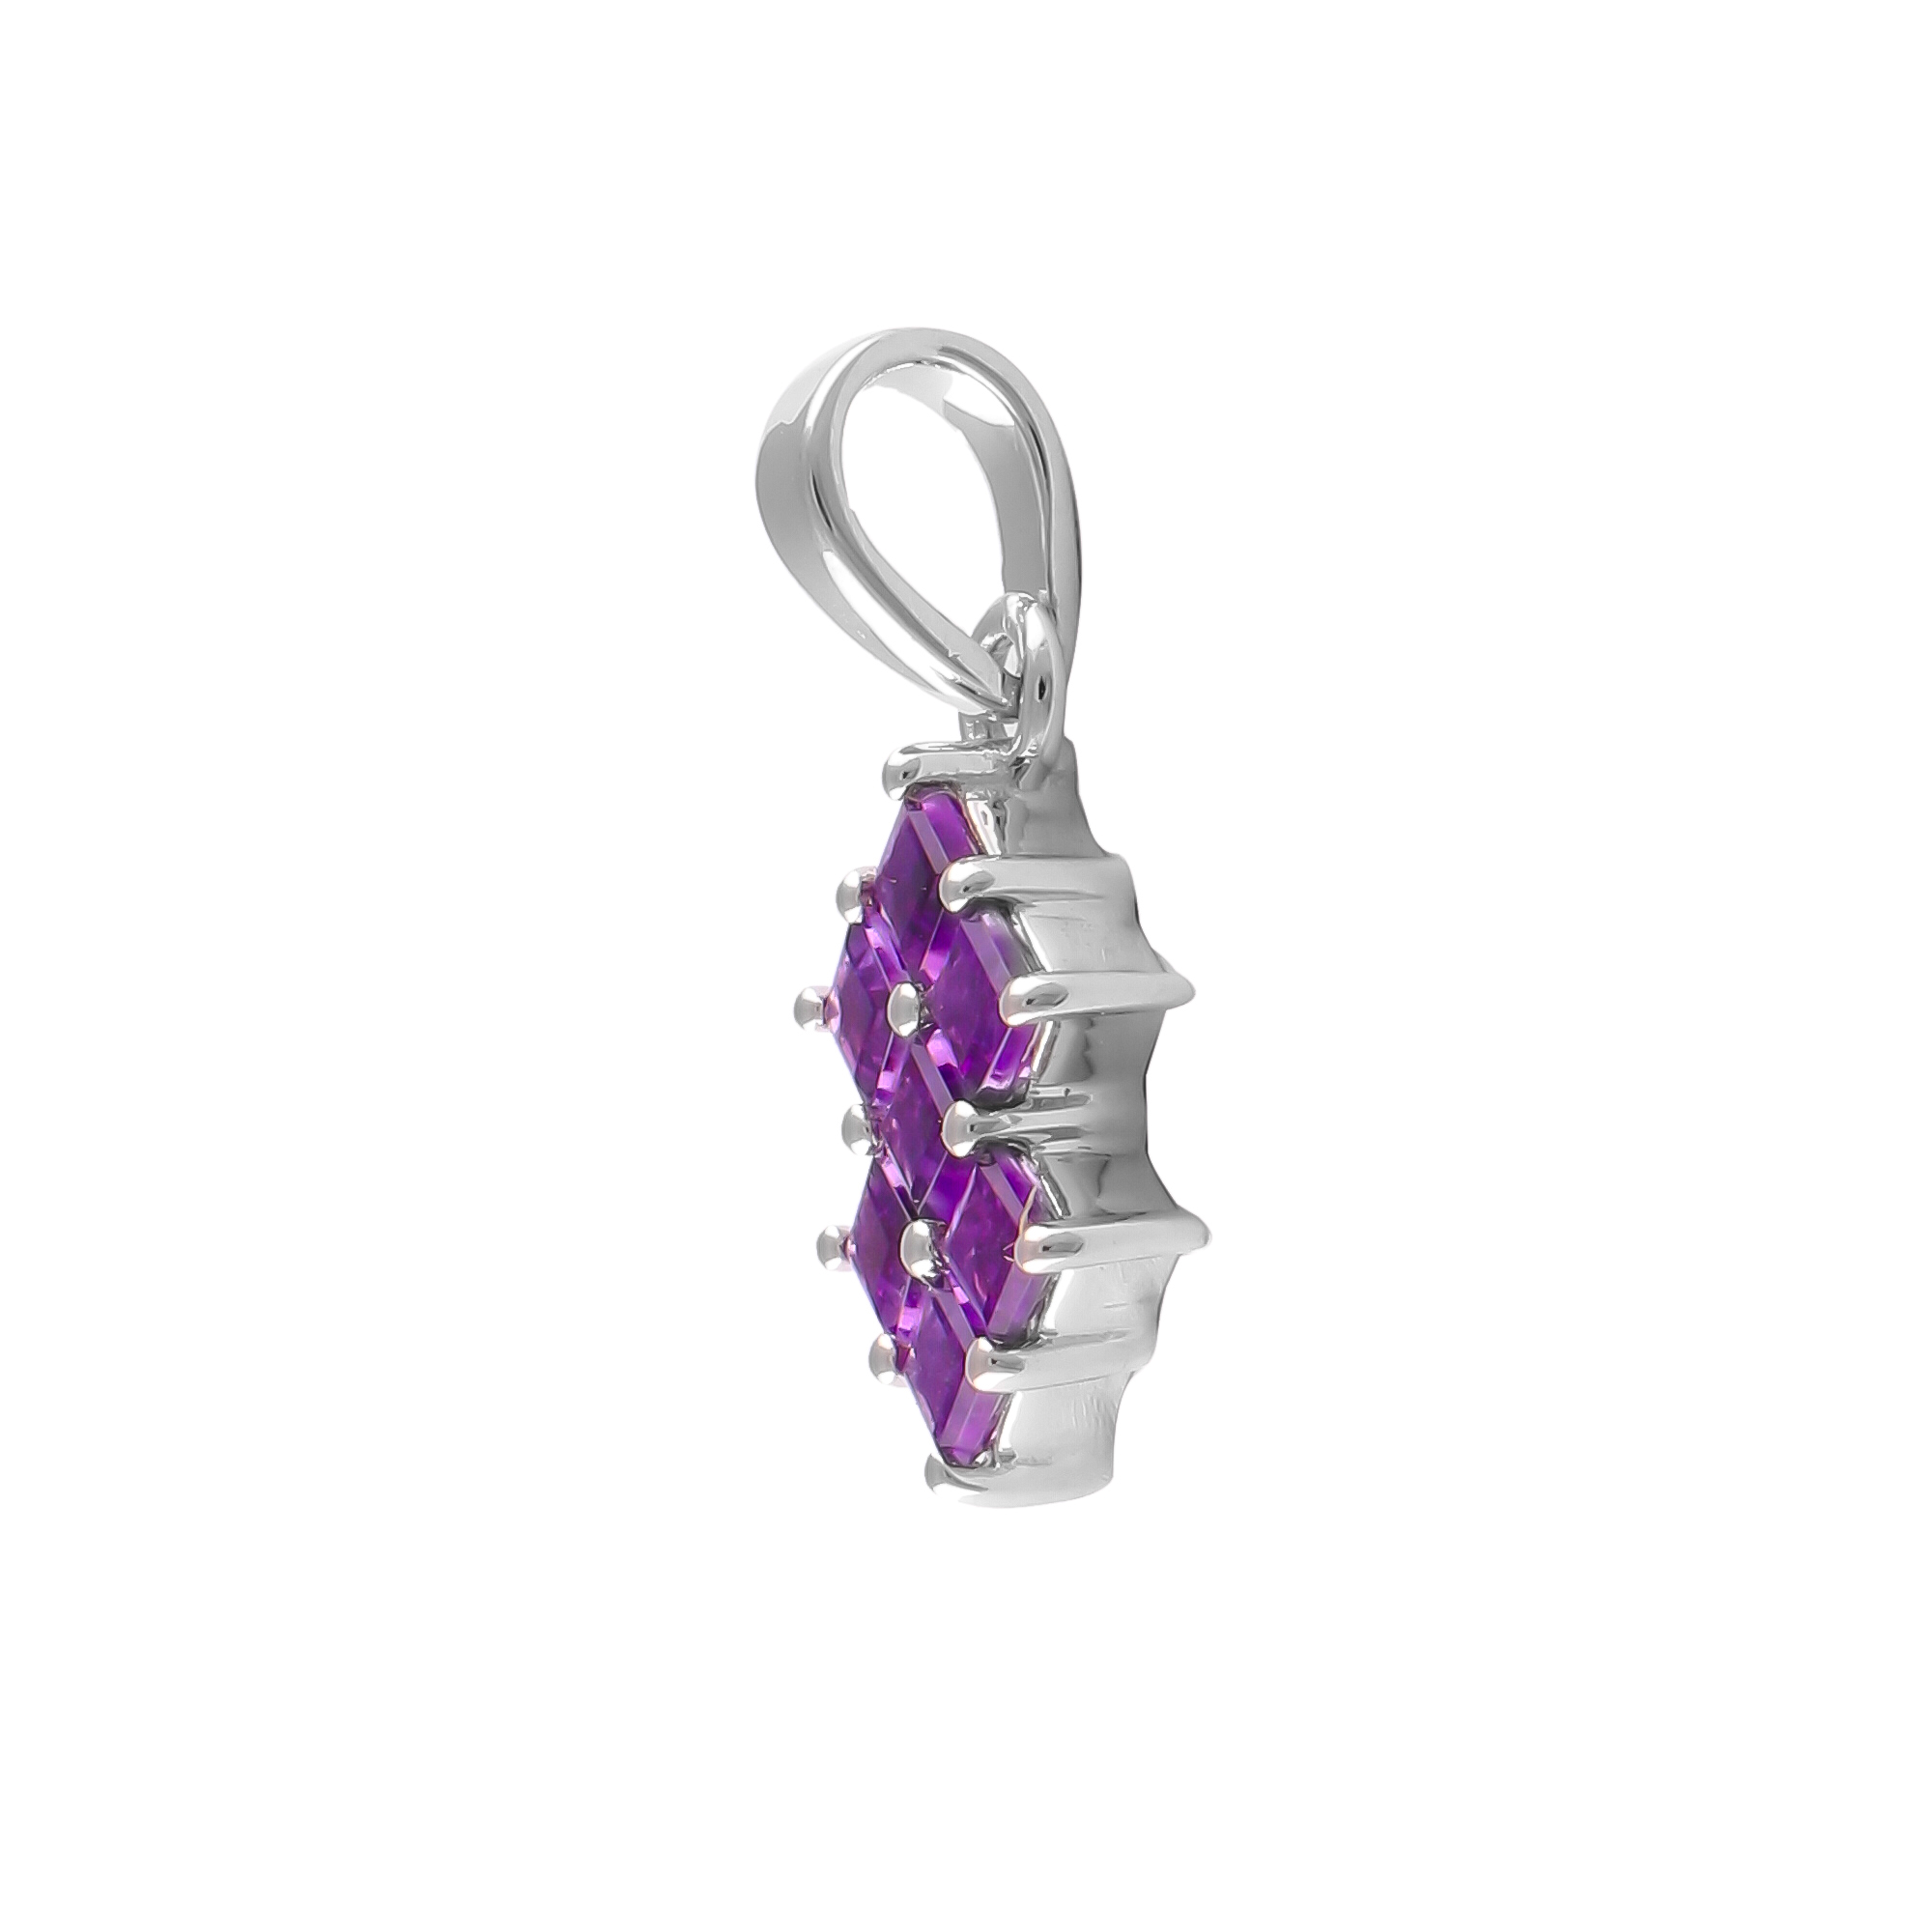 Amethyst square 925 sterling silver